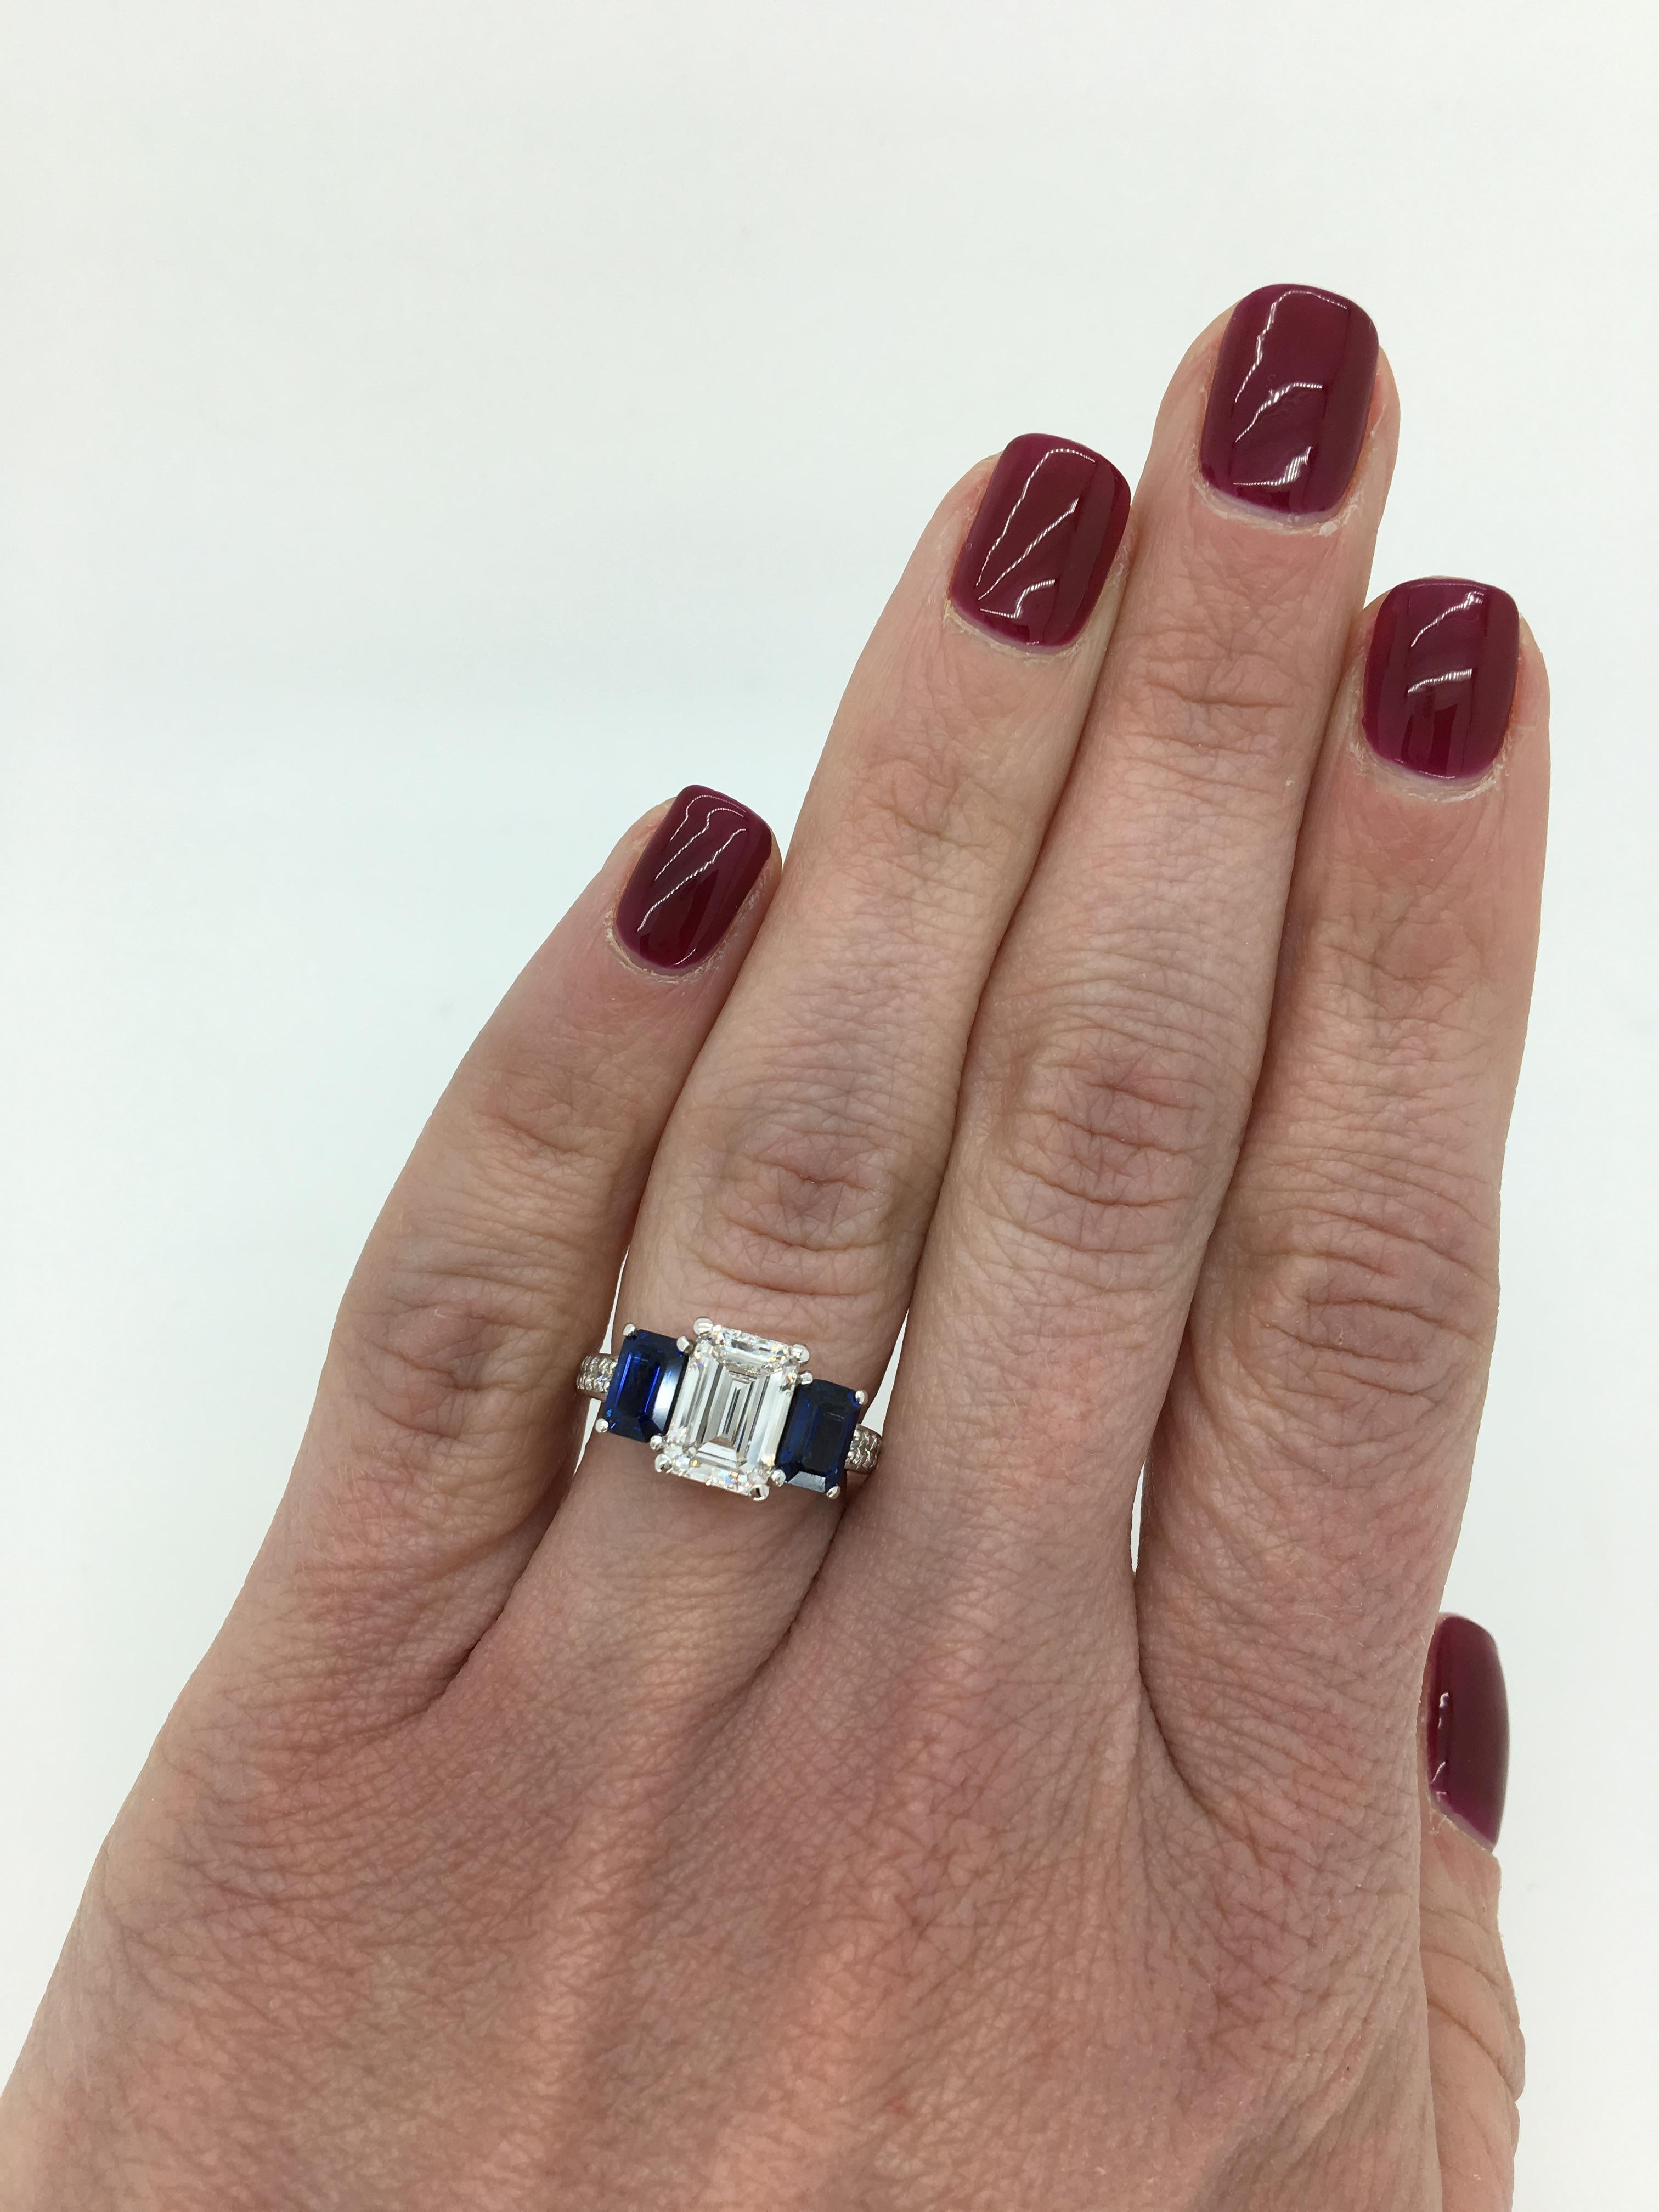 Classic three stone Emerald Cut engagement ring with accenting Blue Sapphires crafted in 14K white gold.

Gemstone: Diamond and Sapphire
Gemstone Size: Two Approximately 3.75x6mm Rectangular Cut Blue Sapphires
Center Diamond Carat Weight: